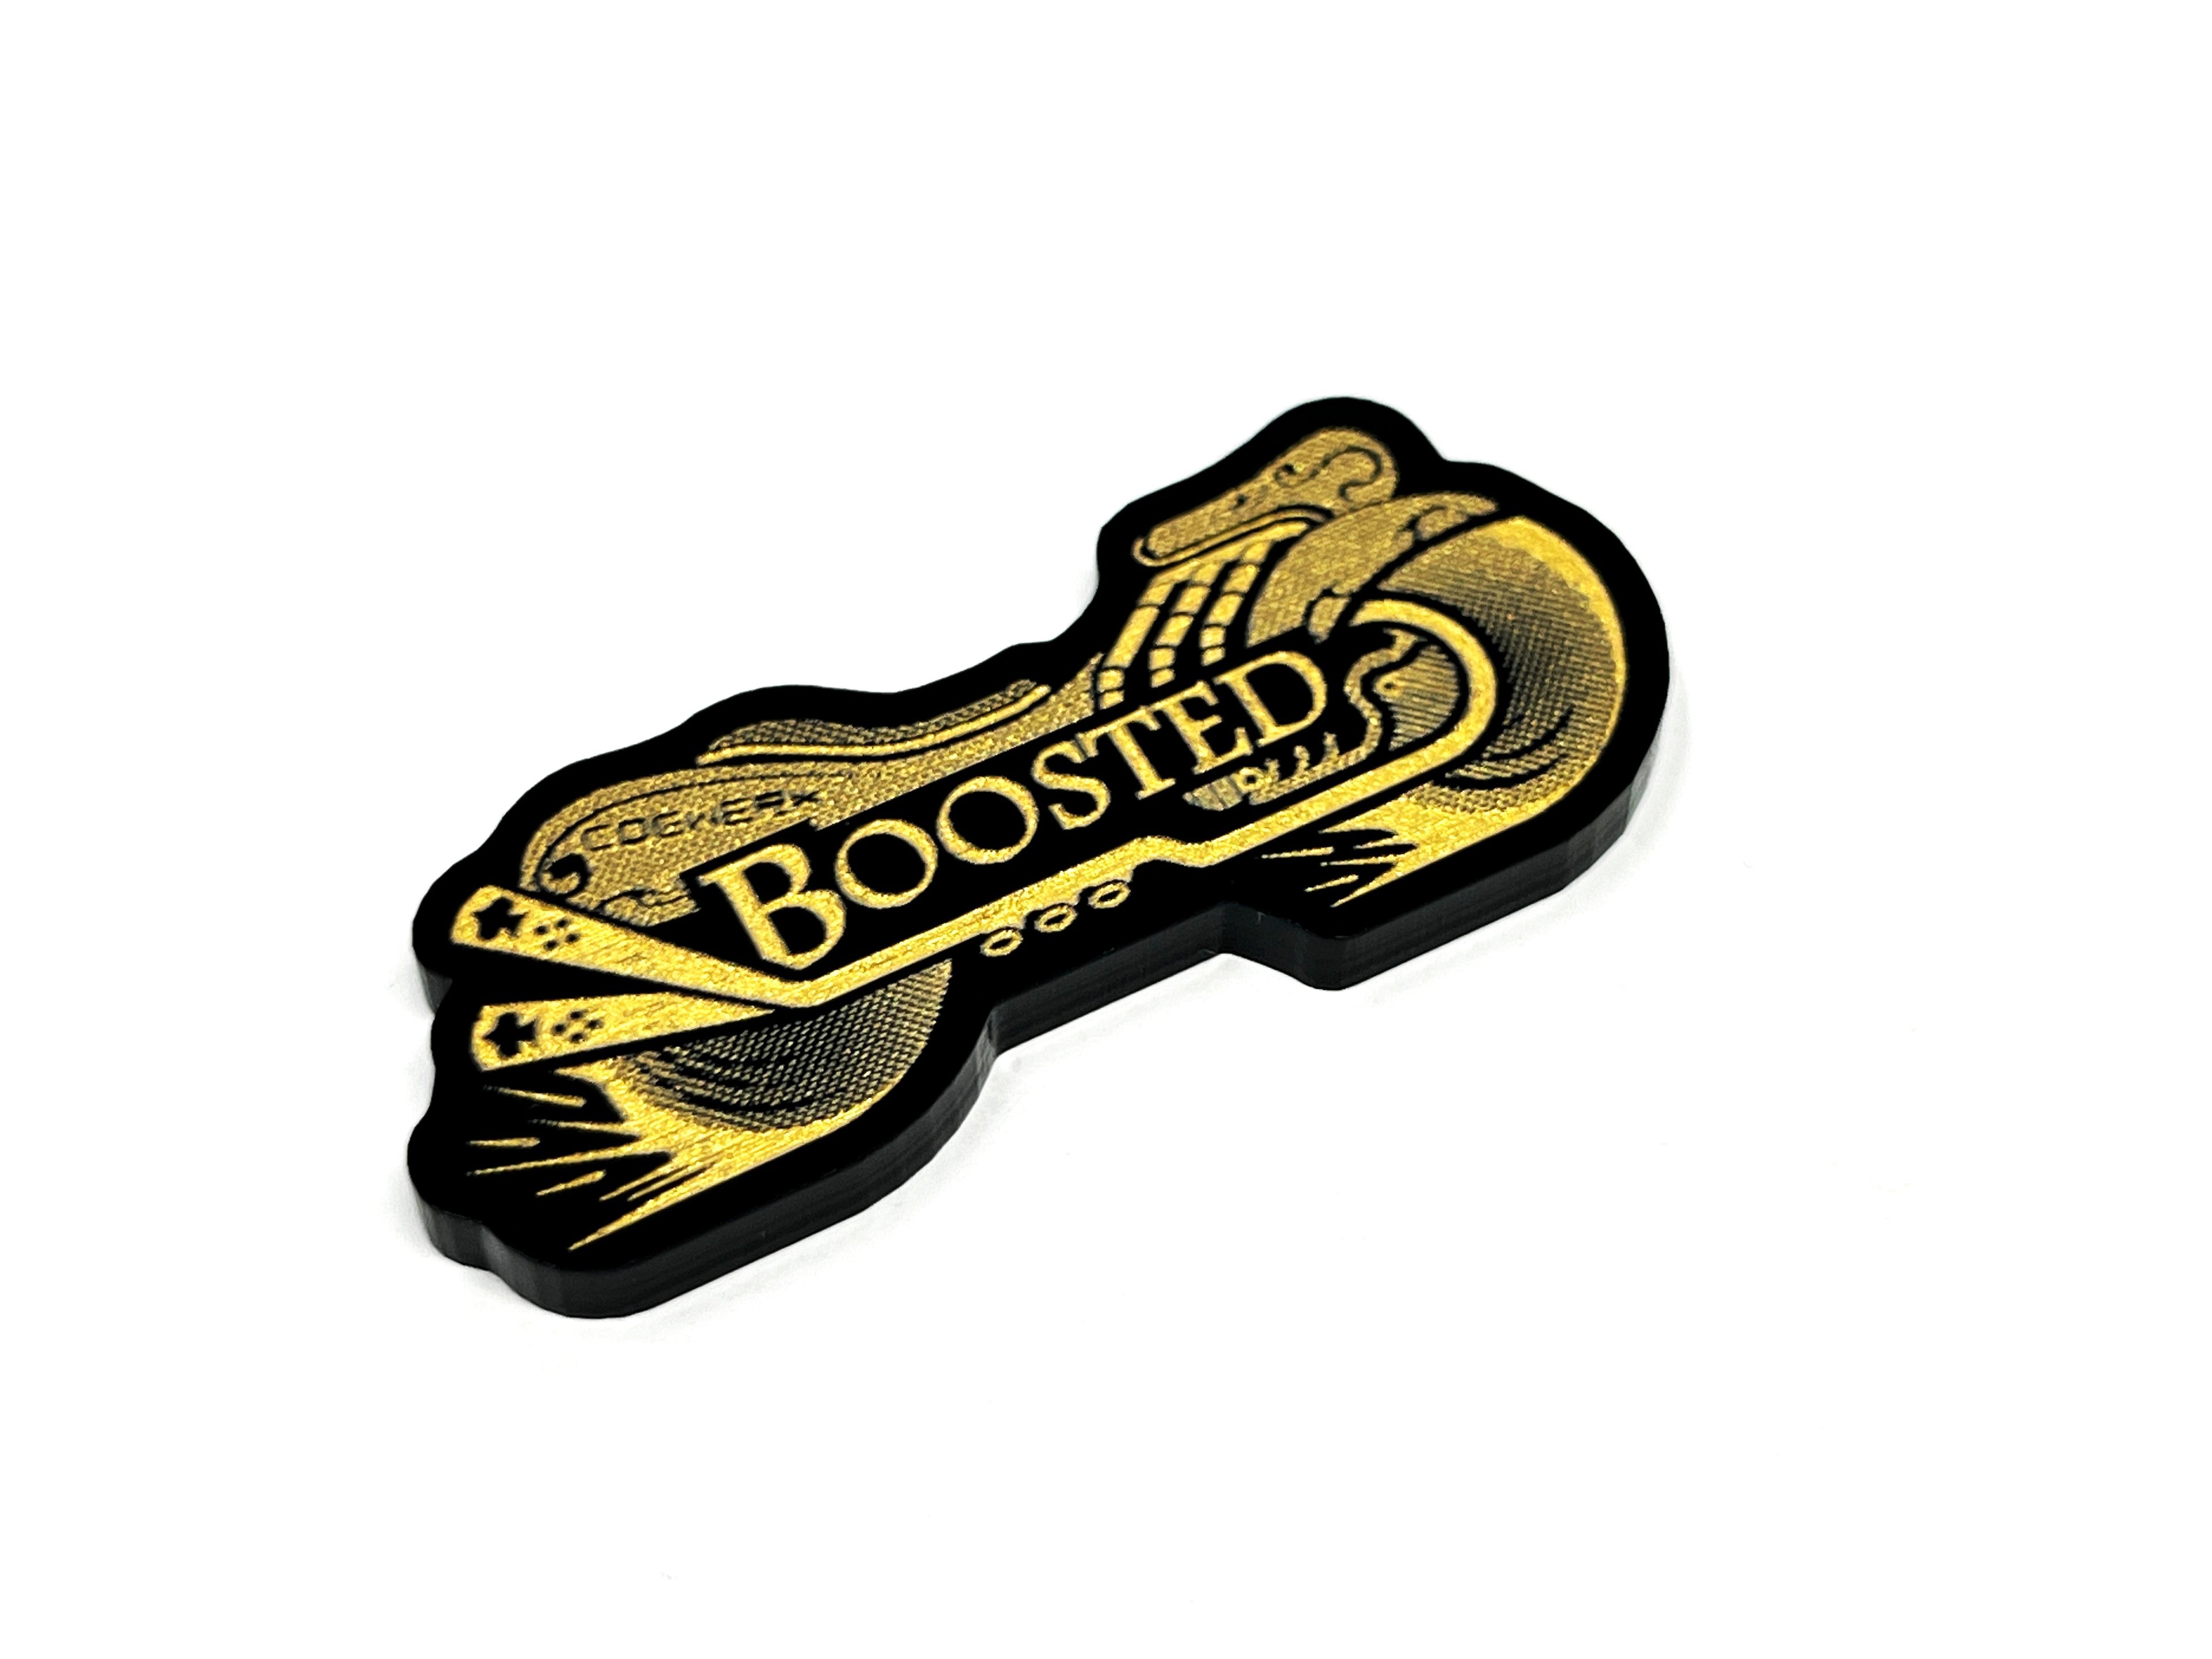 Boosted Token